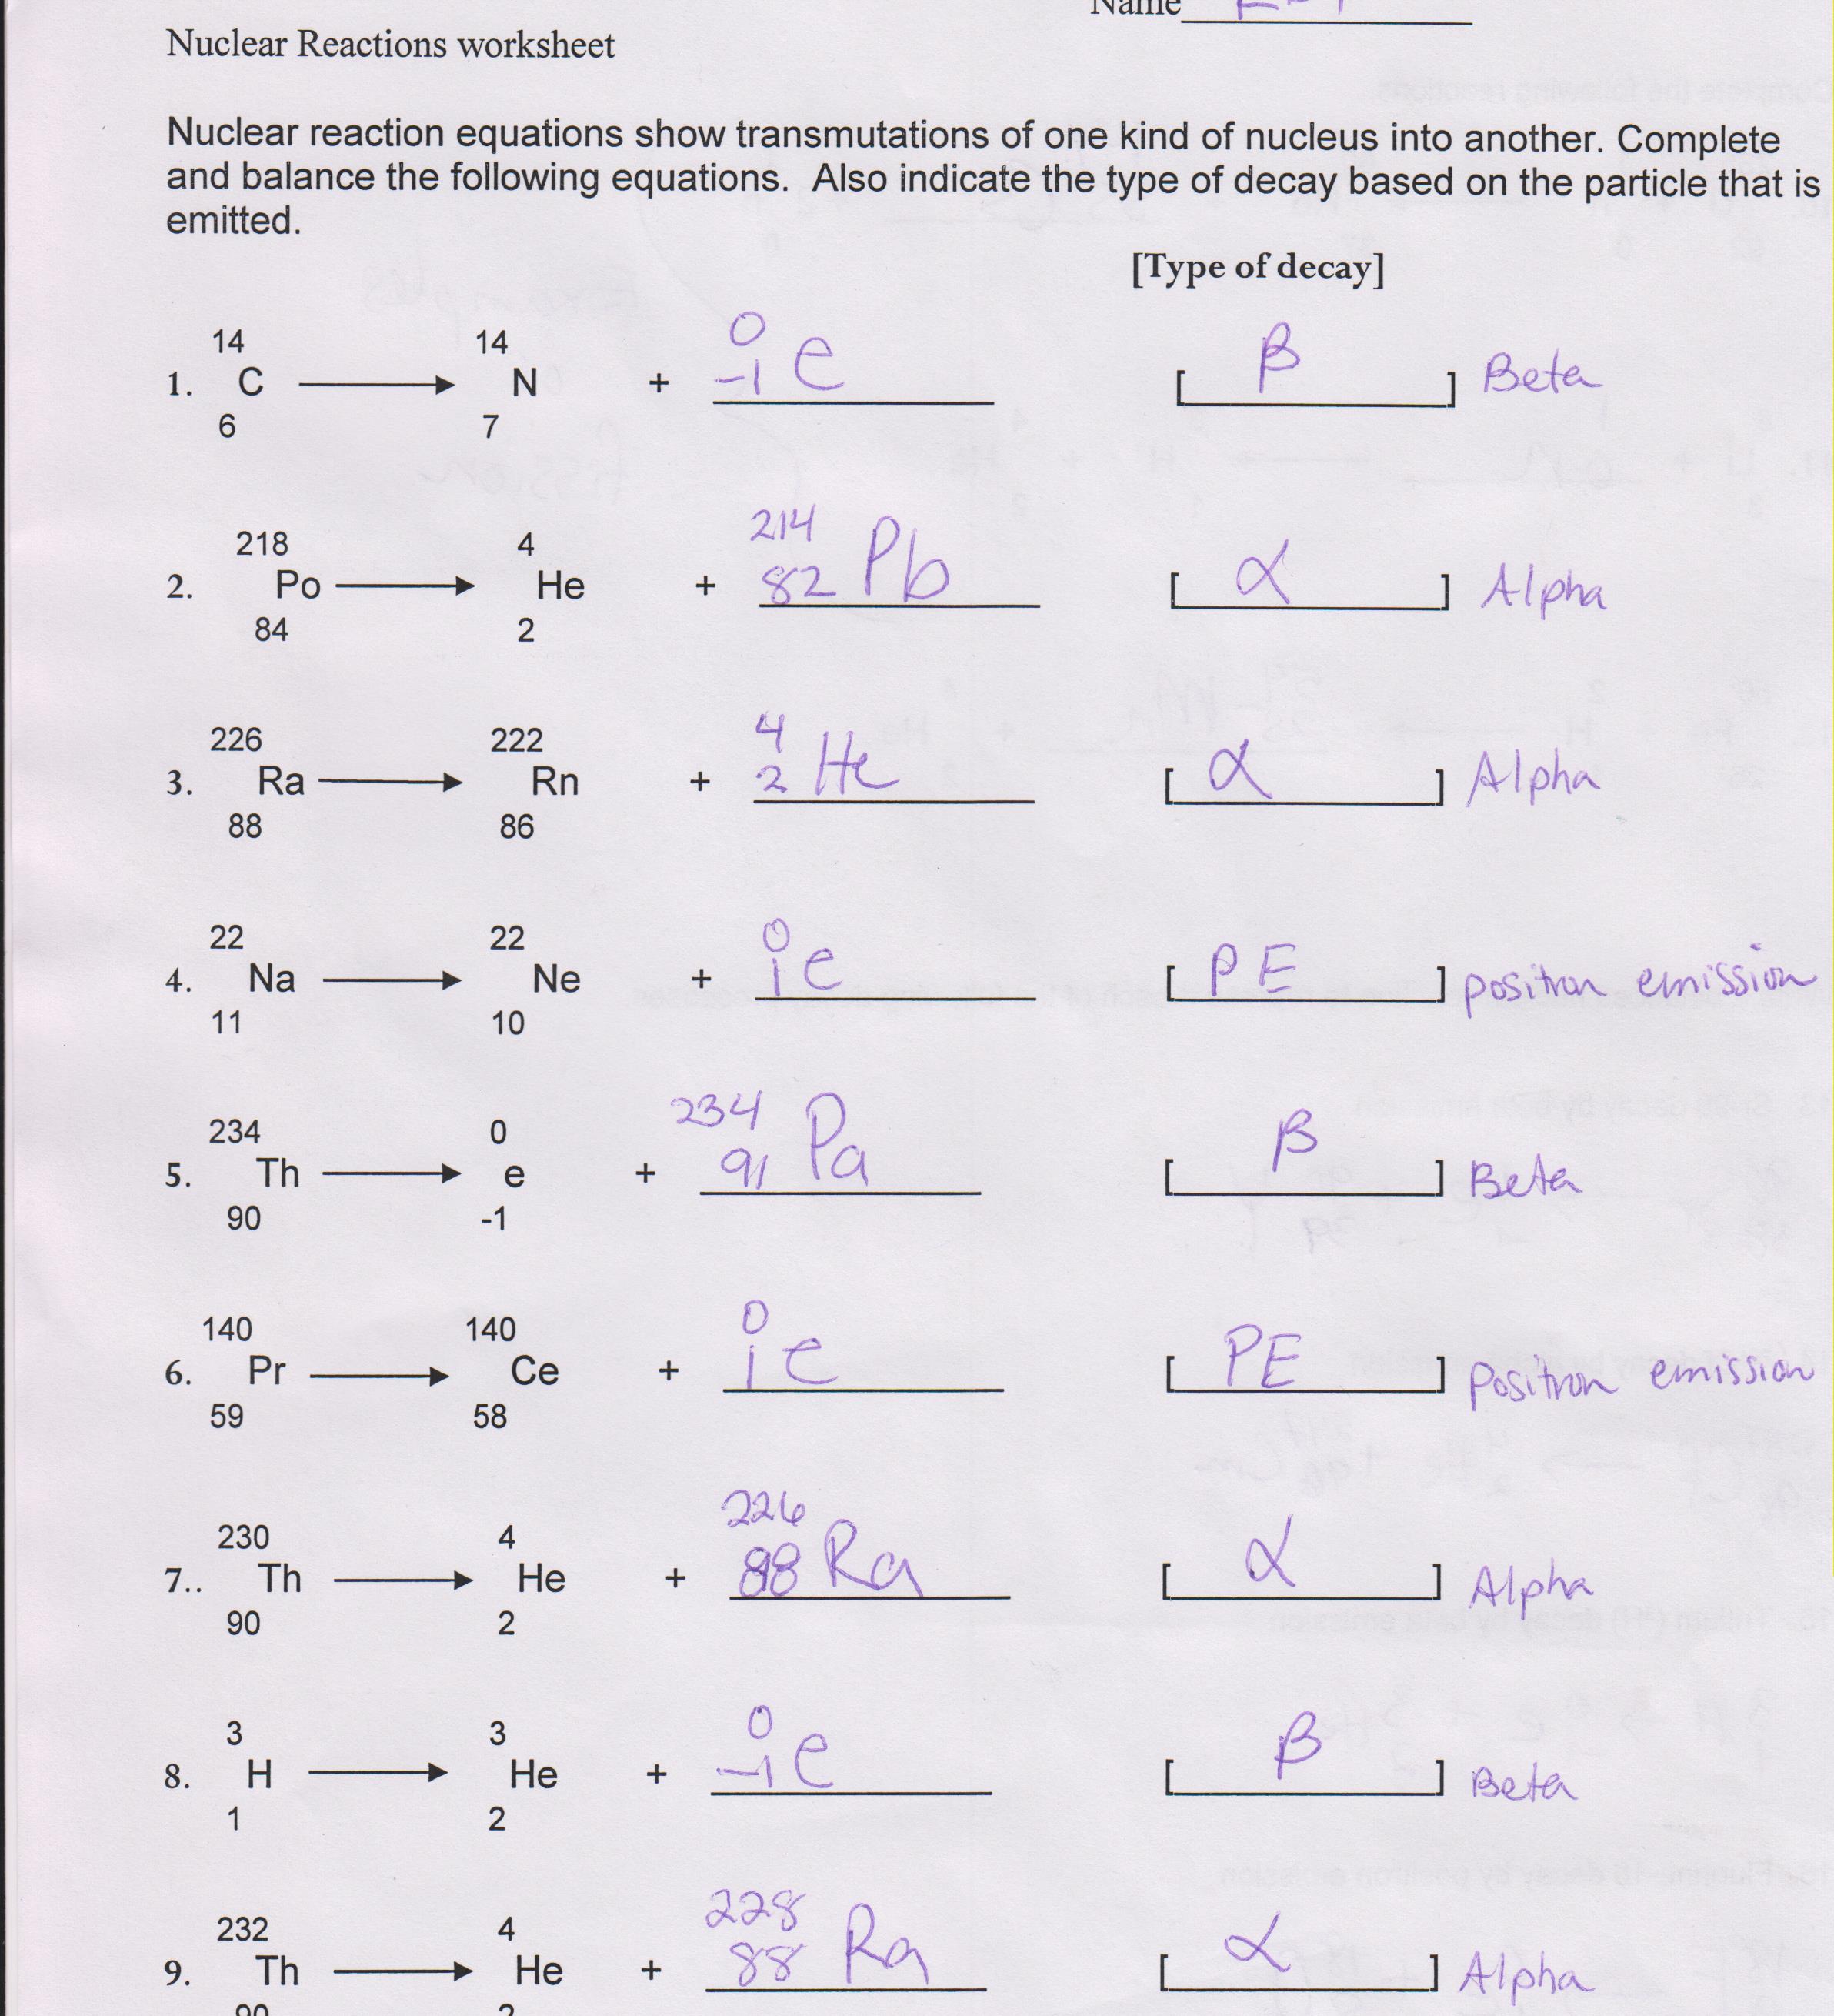 Finishing up Nuclear Equations Pertaining To Nuclear Decay Worksheet Answers Key